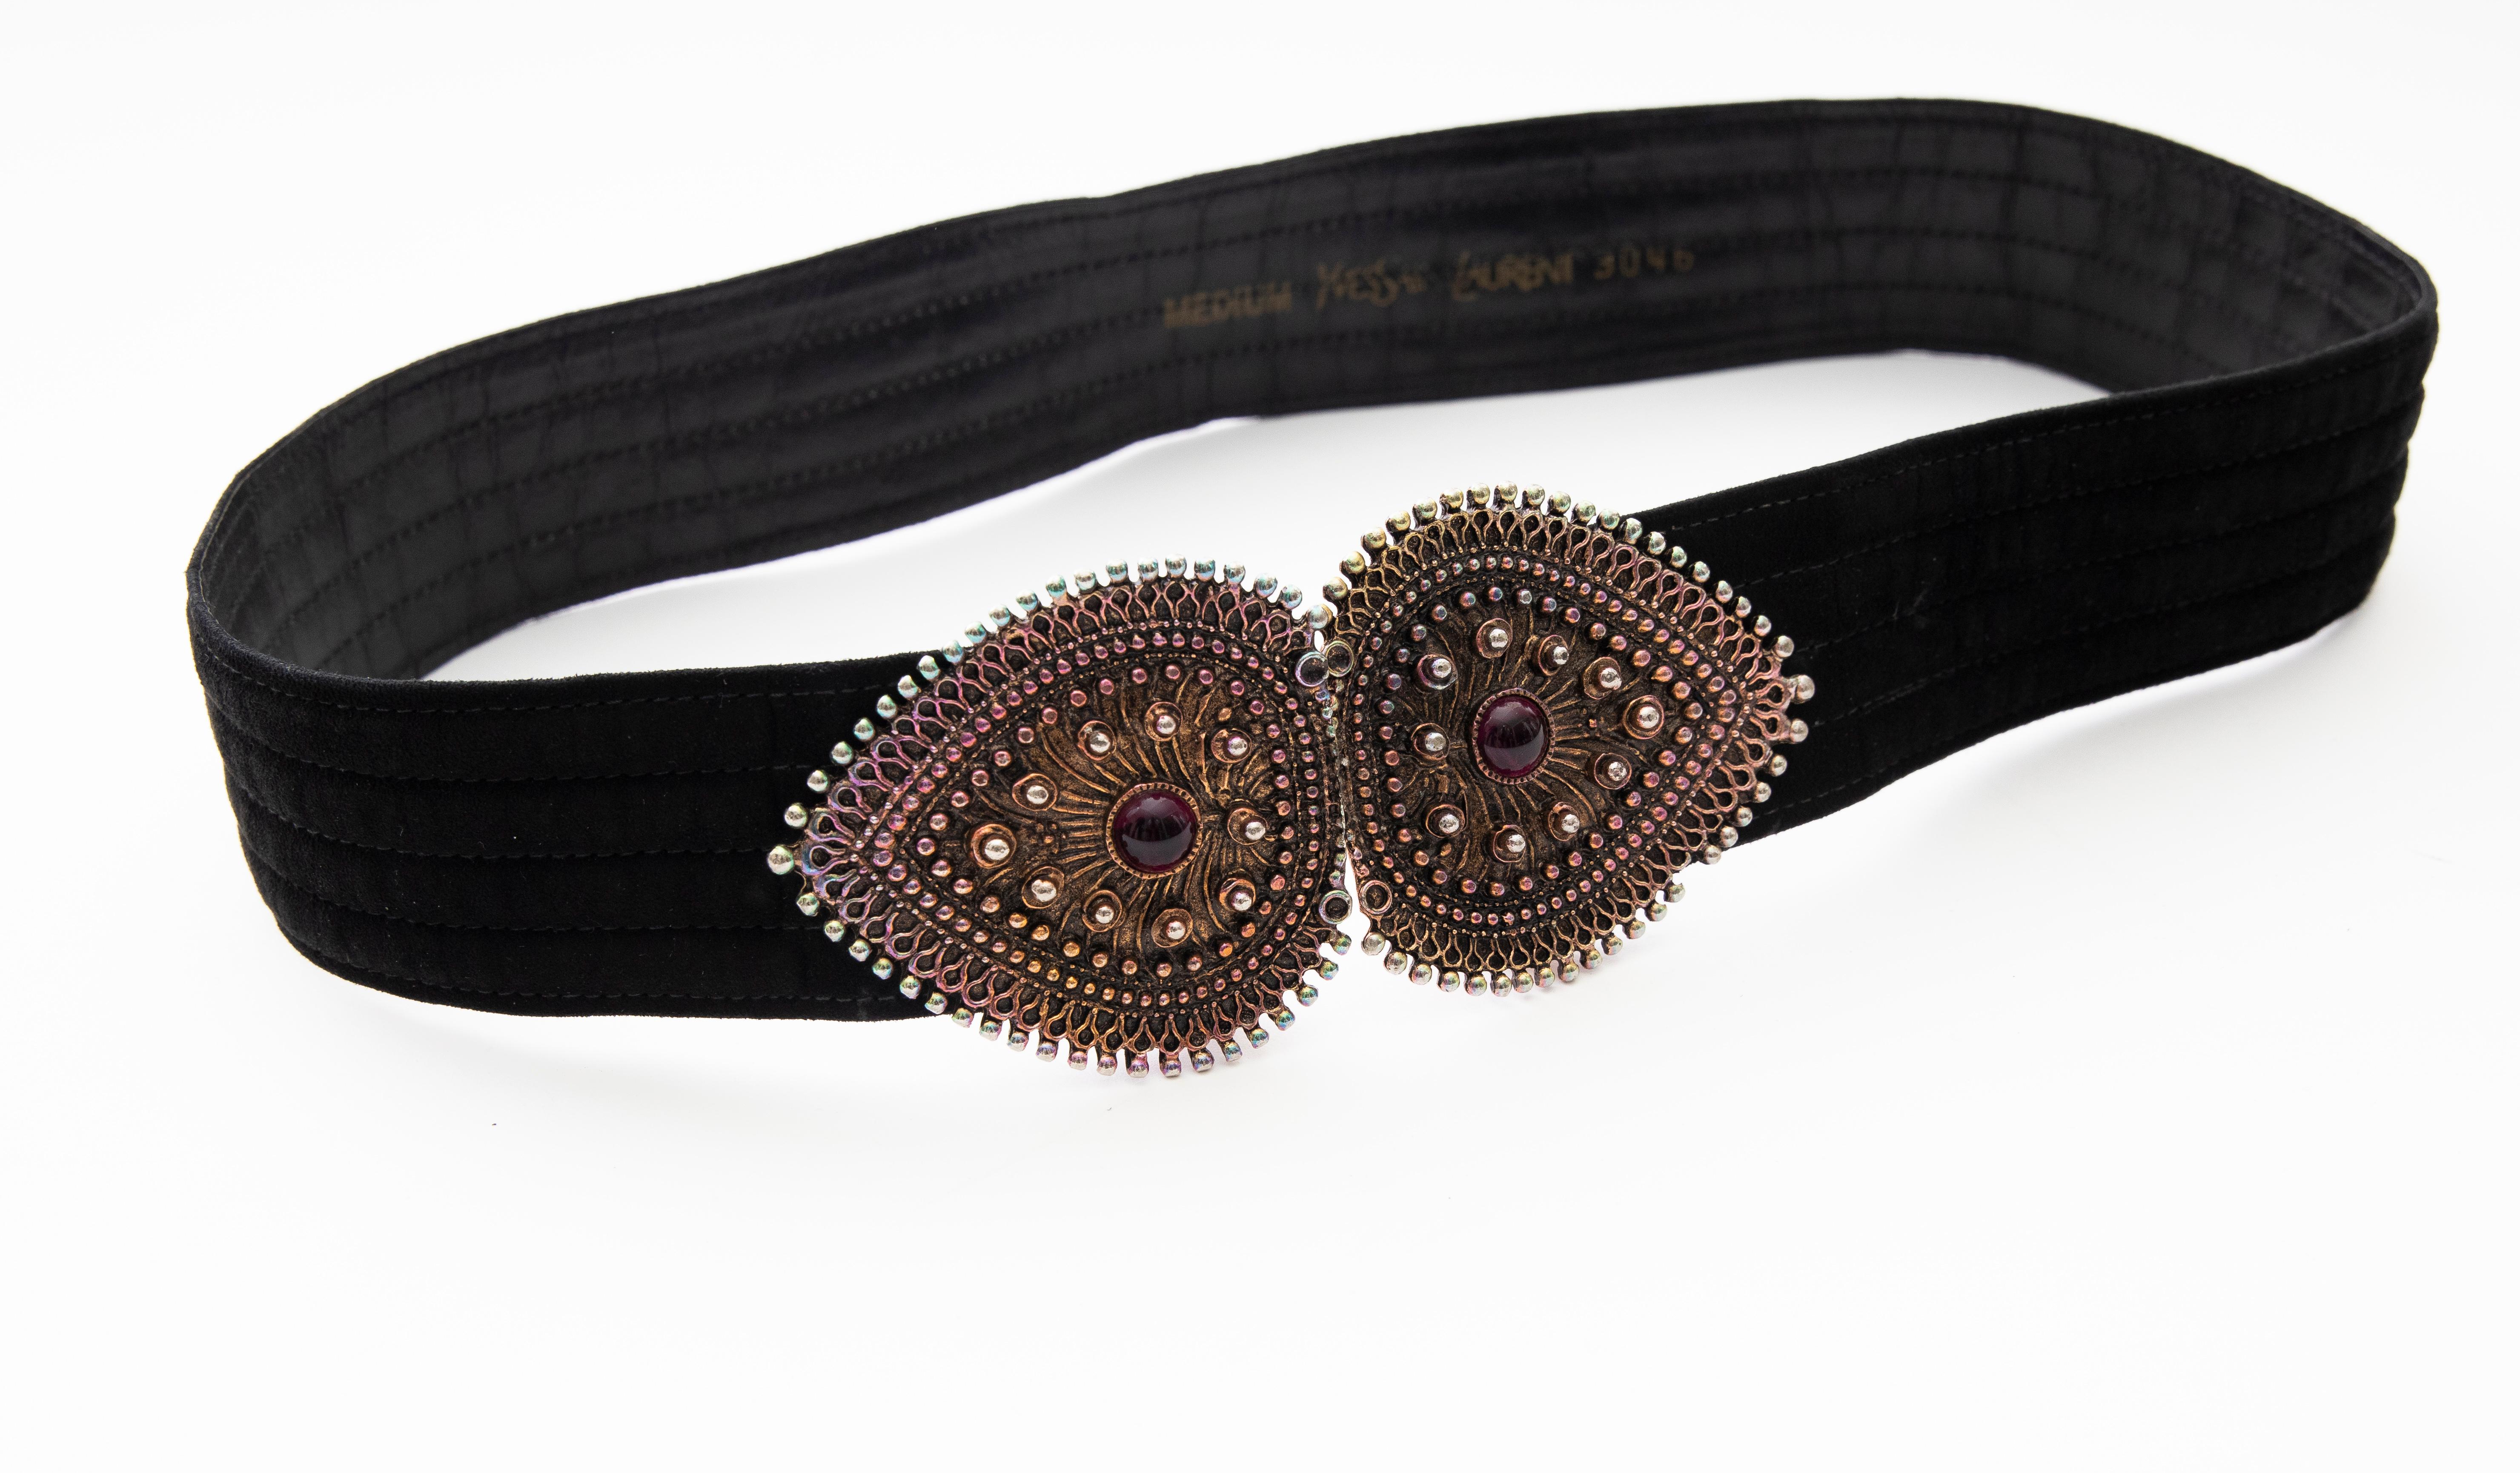 Yves Saint Laurent, late 1980's black velvet, metal, glass cabochons belt with hook closure.

Part of the Met Costume Institute Collection: Accession Number:2006.420.156

Length Max: 34, Width: 3.25
